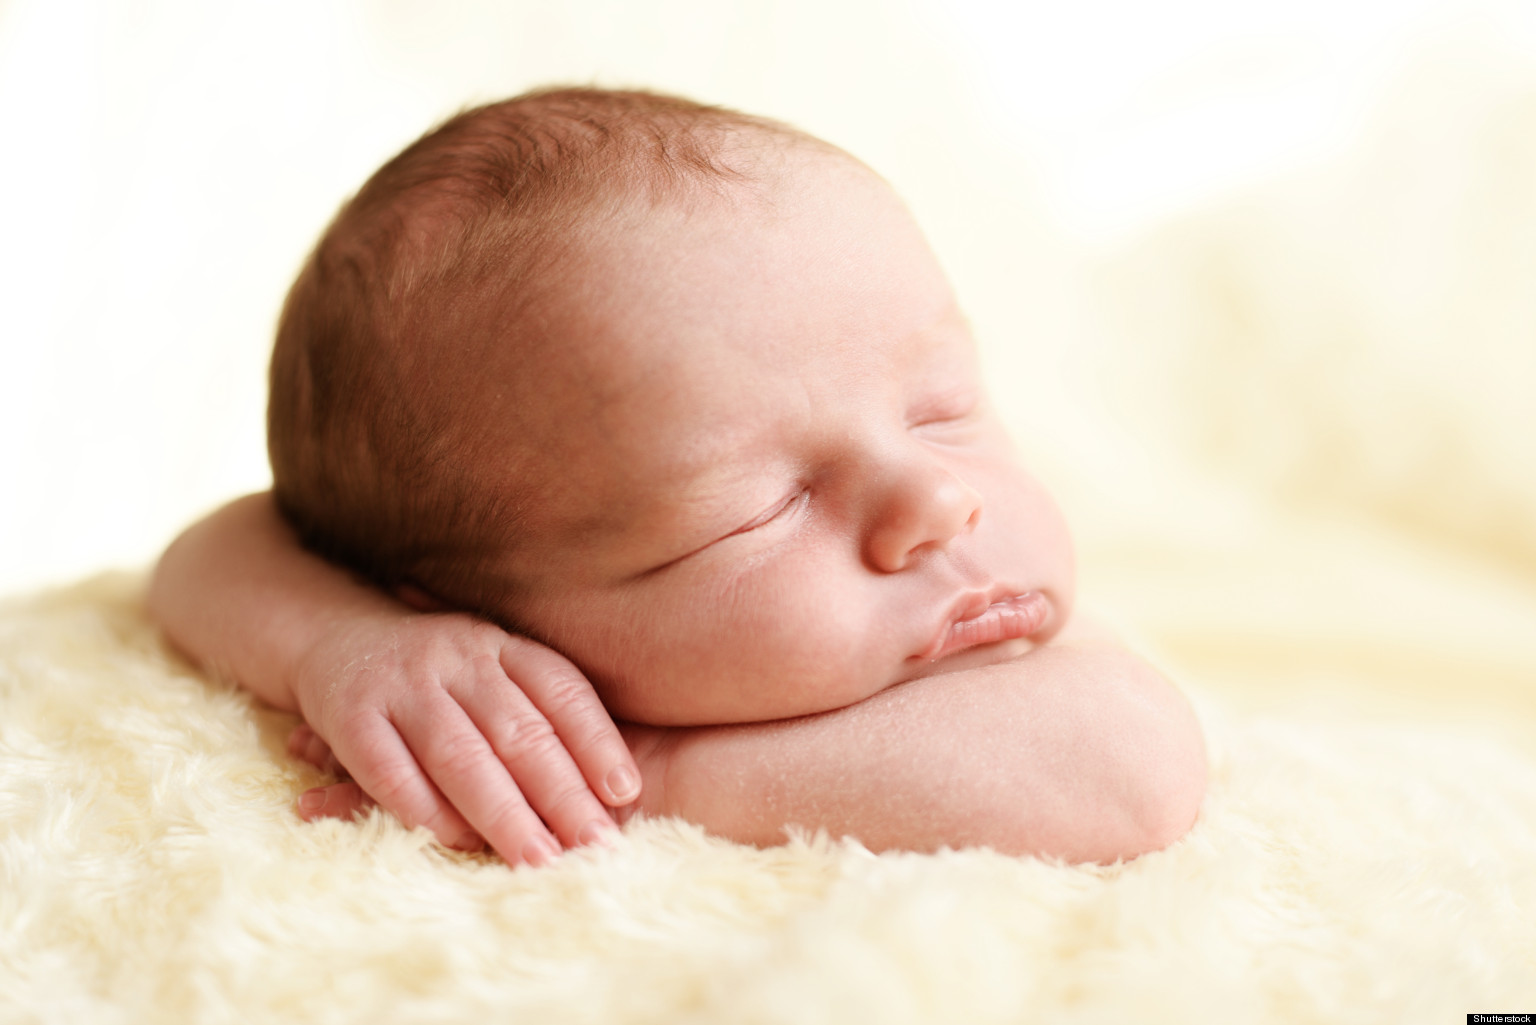 Newborn Babies Are Terrifying -- Seriously